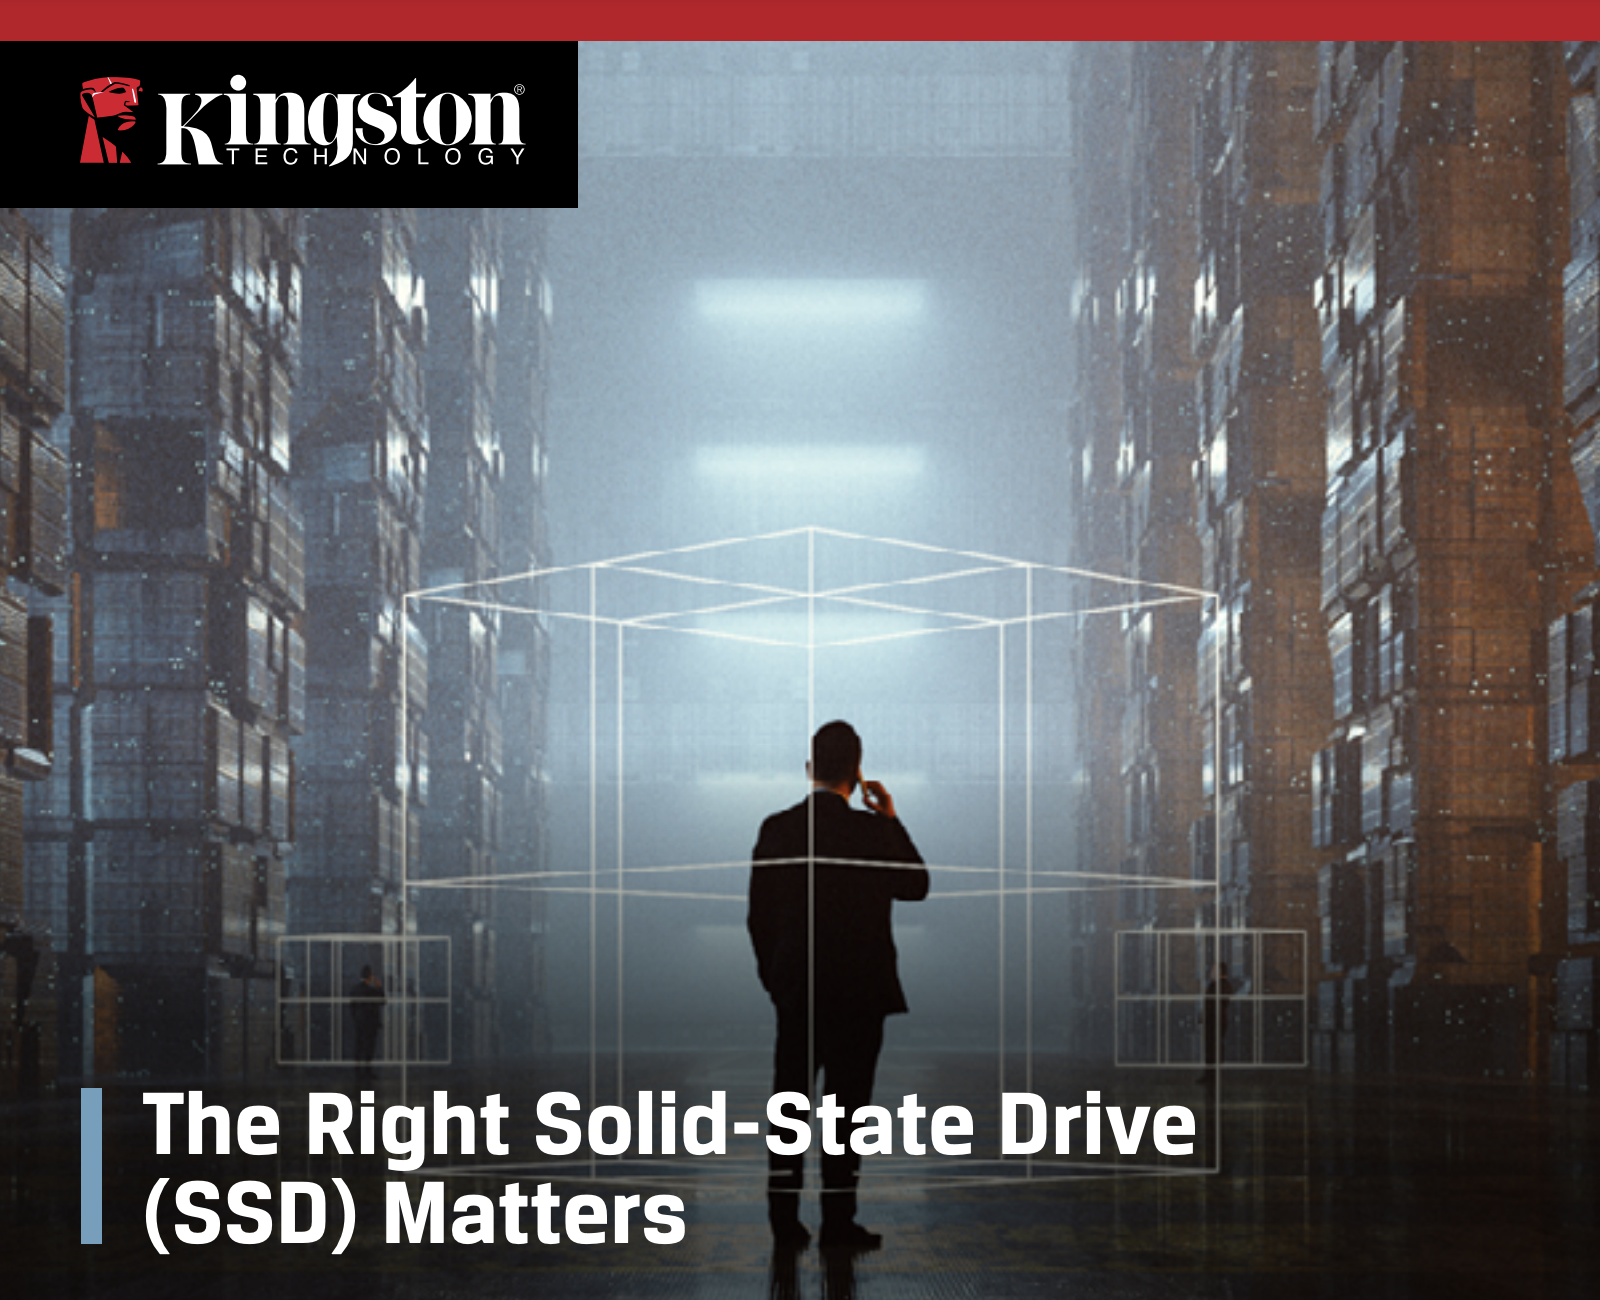 The Right Solid-State Drive (SSD) Matters